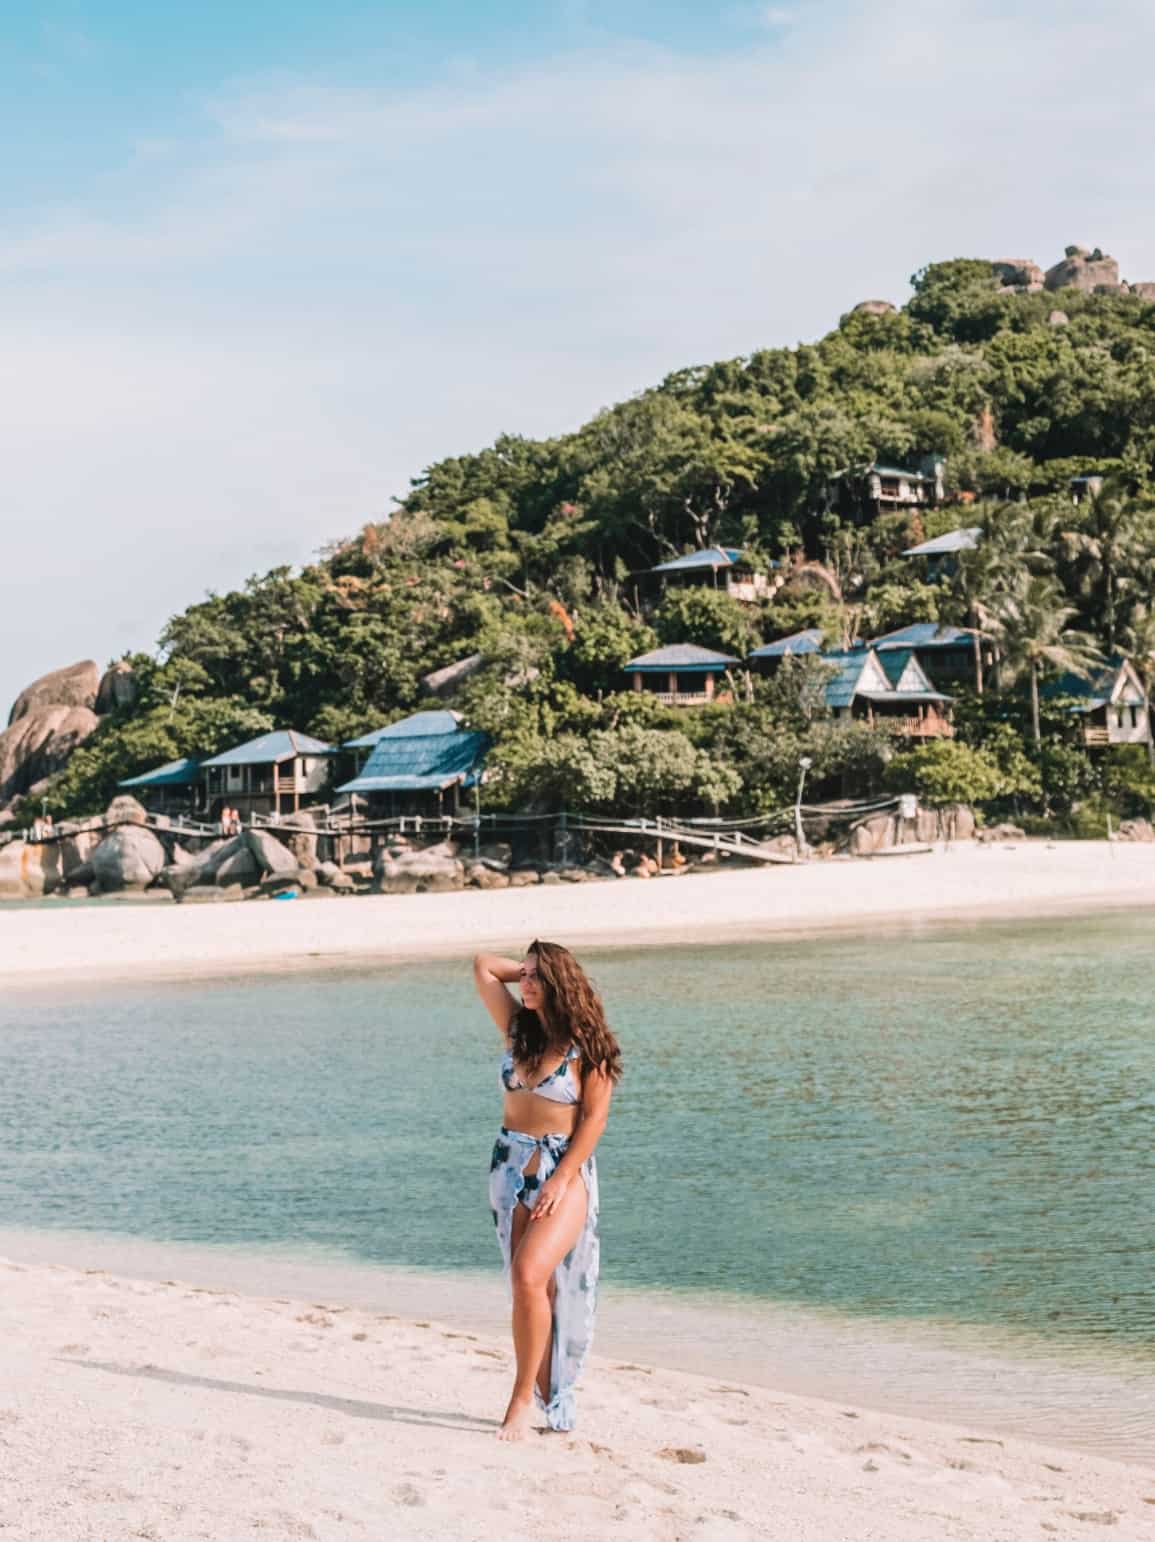 Blog post about Koh Tao – Thailand's budget-friendly, backpacker island 